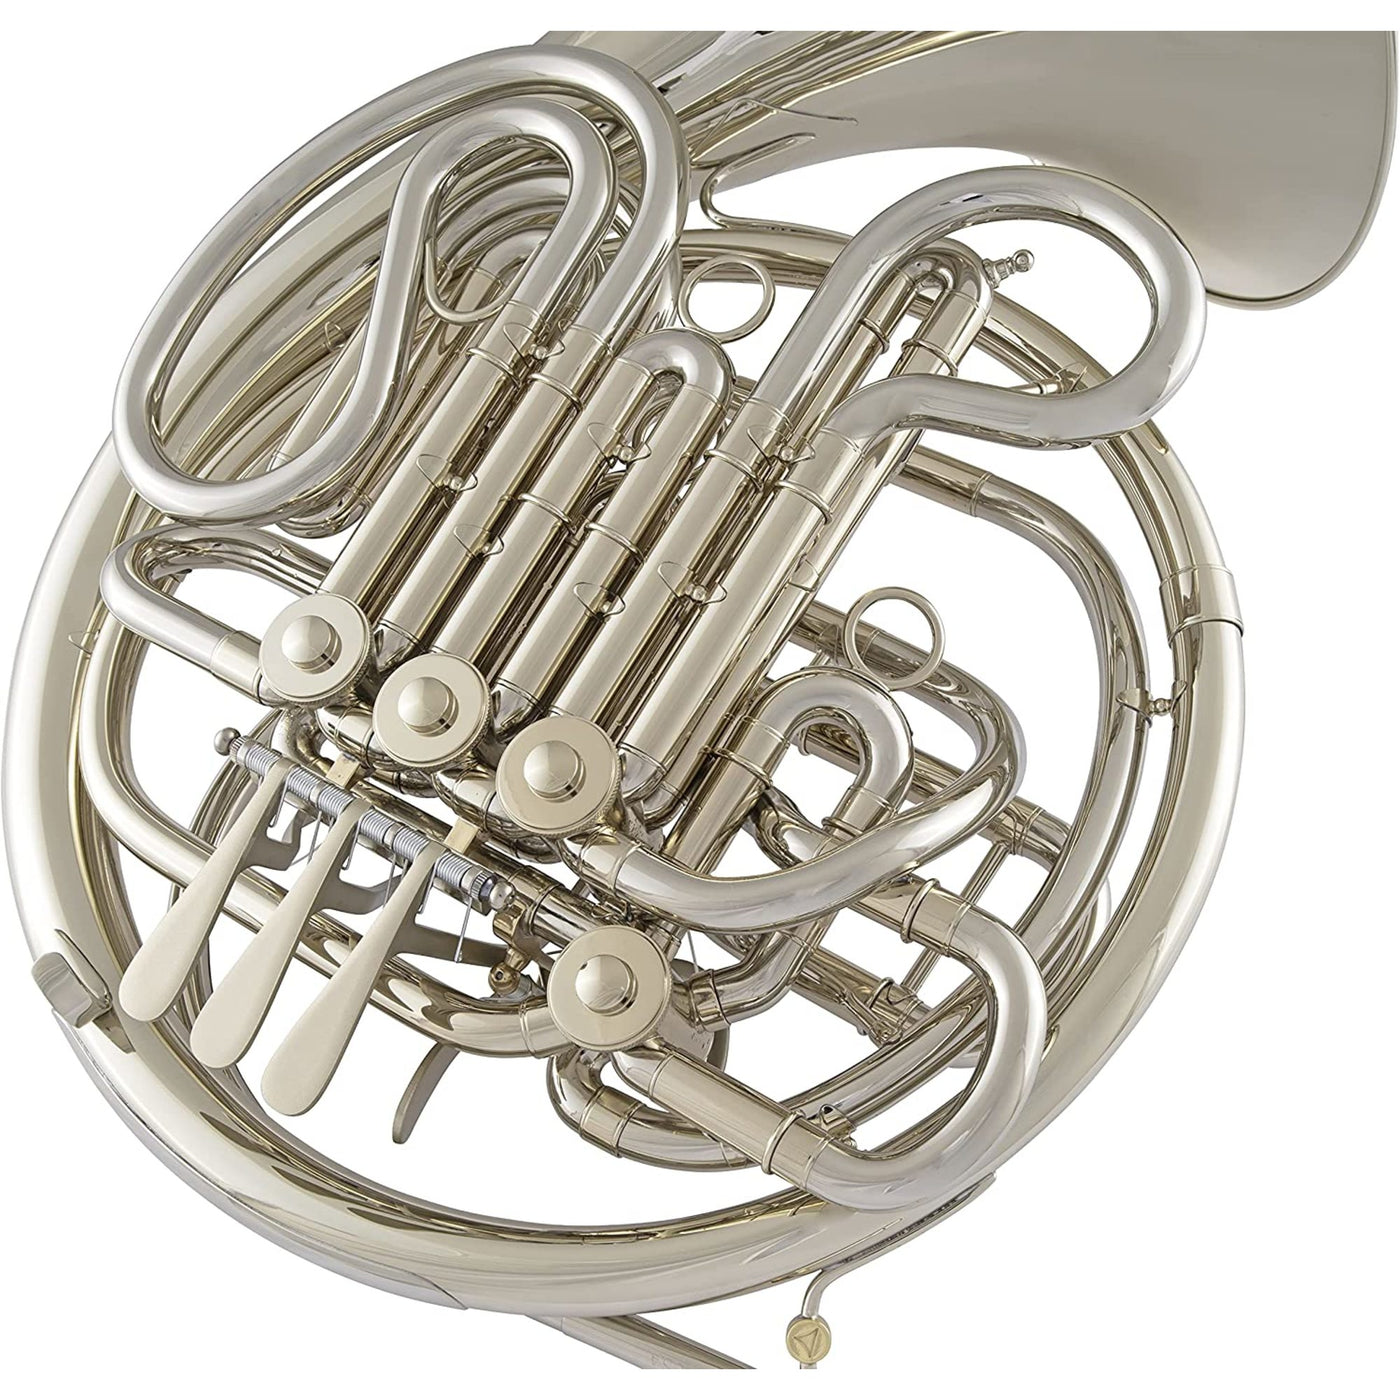 Holton Farkas Series Fixed Bell Double Horn (H179)